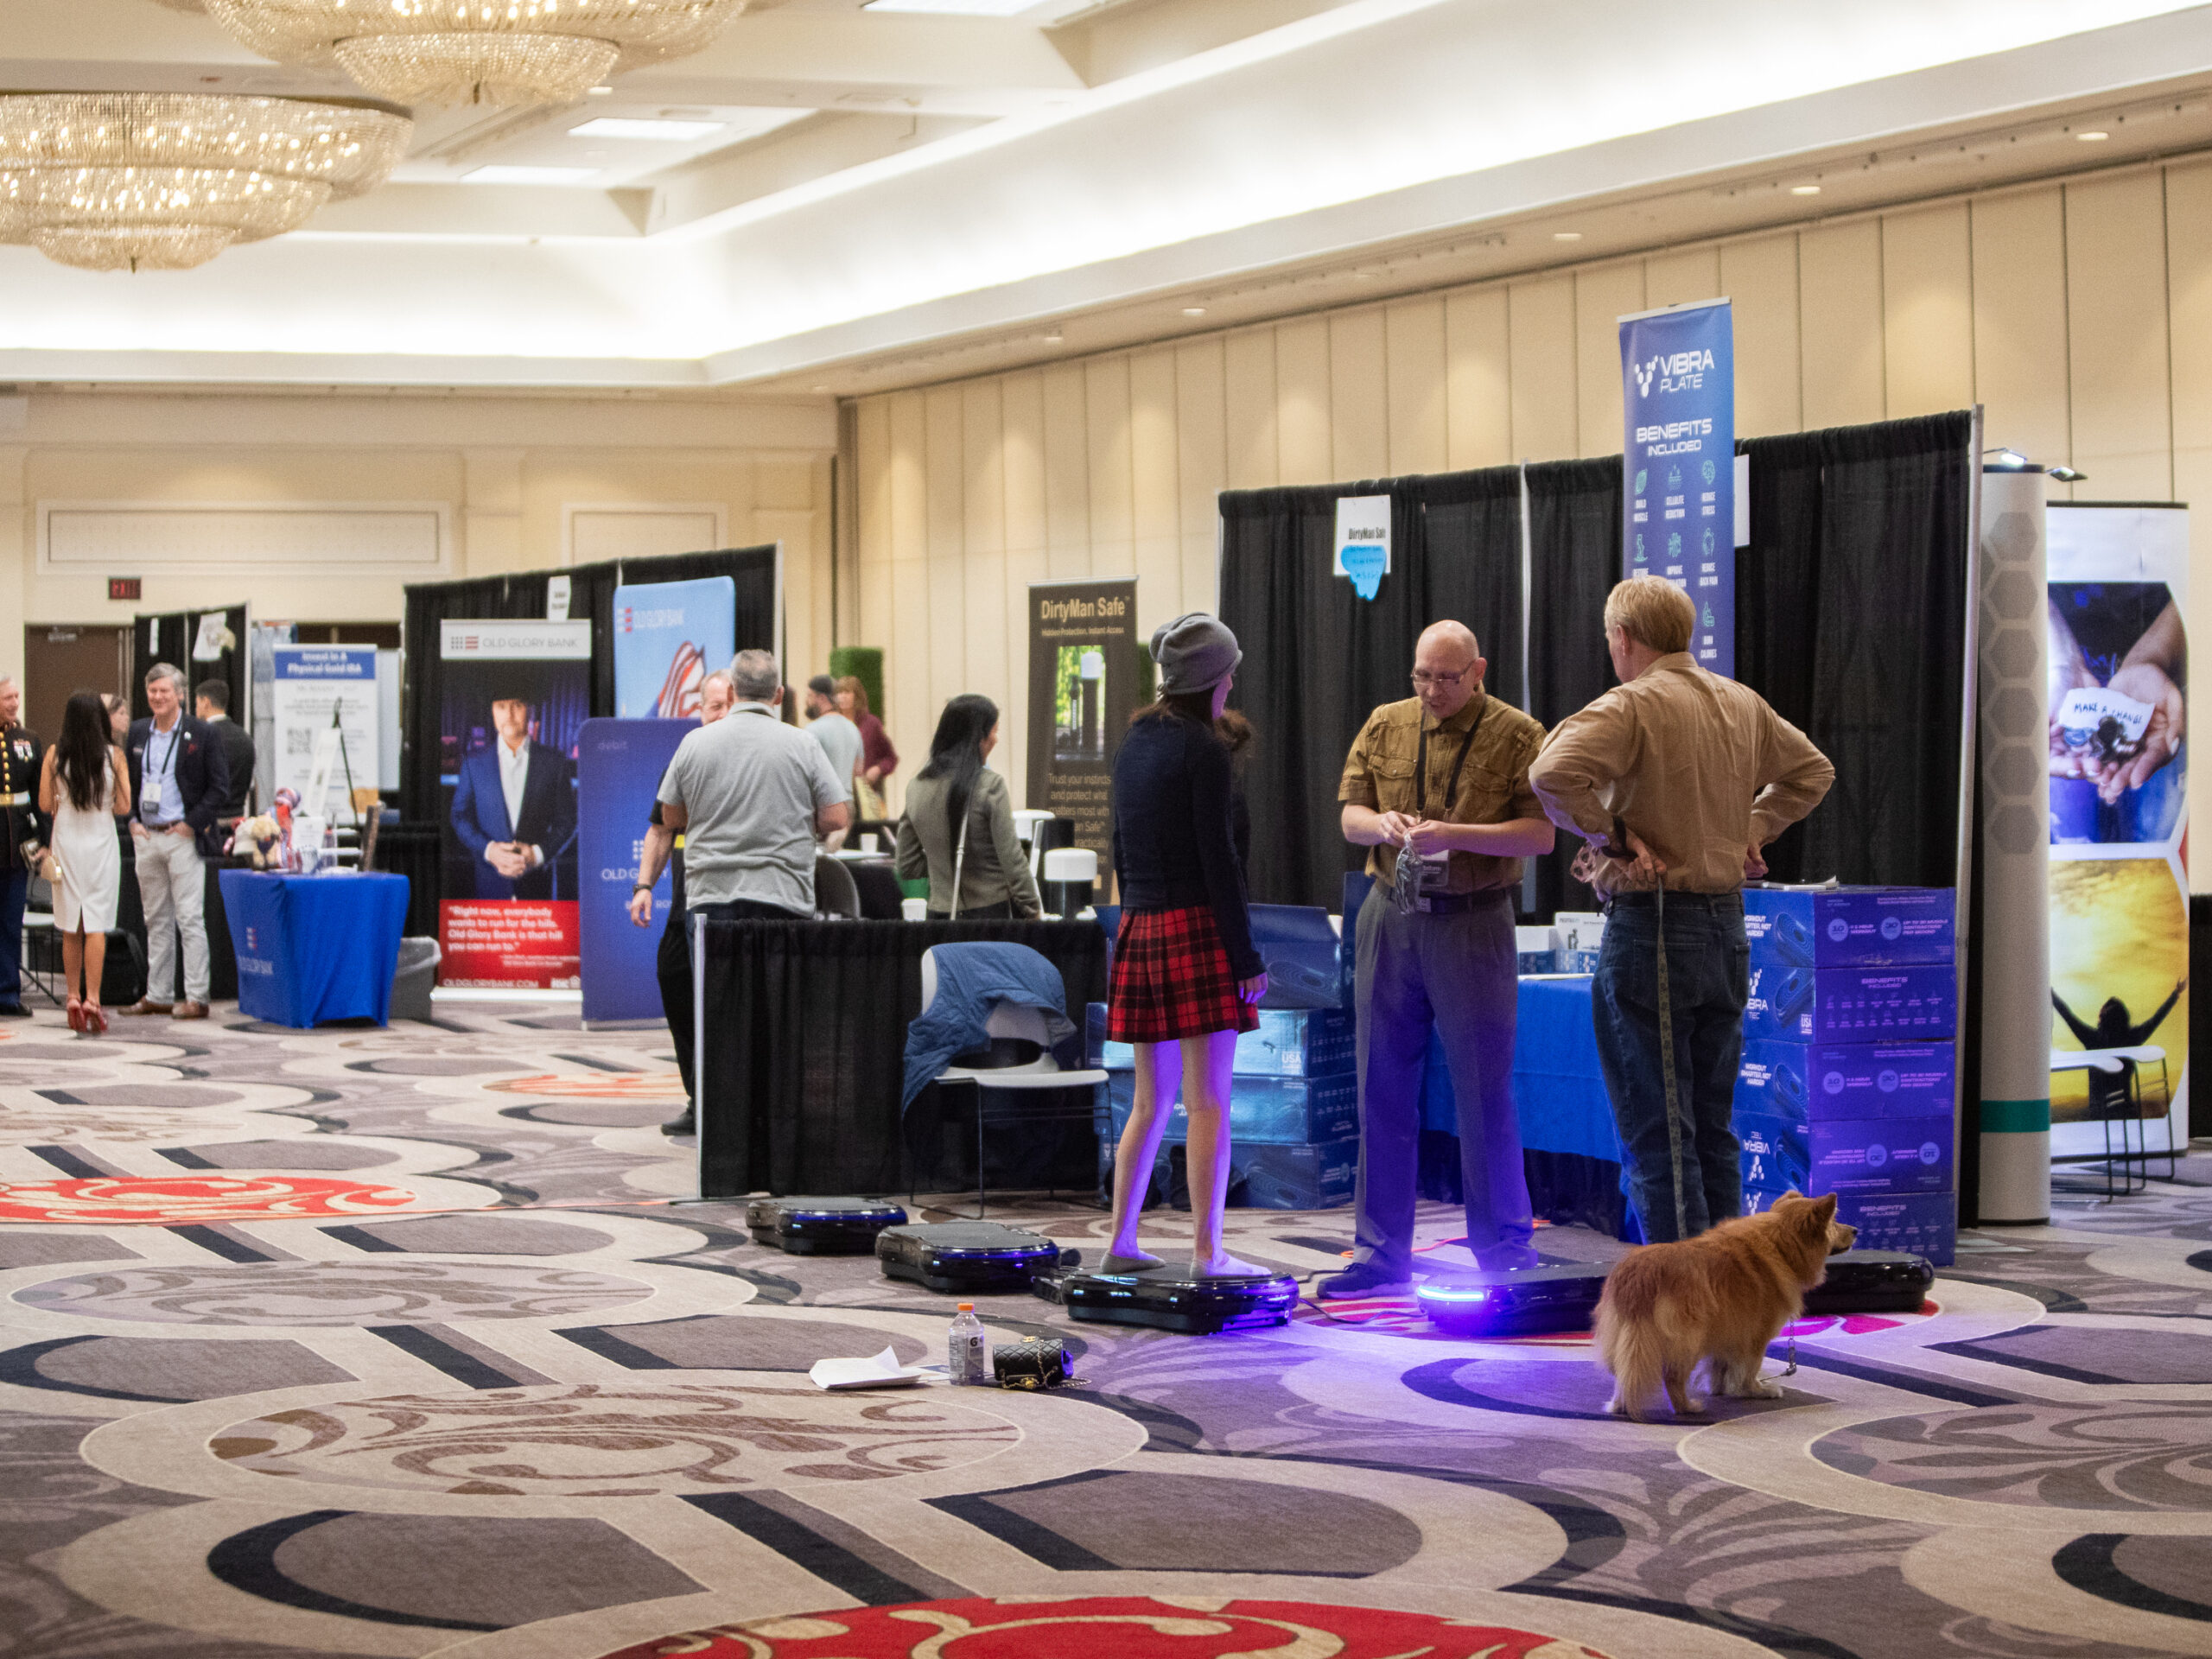 Attendees visit booths at the RePlatform conference in Las Vegas in March. The conference crowd was a hybrid of anti-vaccine activists, supporters of former President Donald Trump and Christian conservatives.